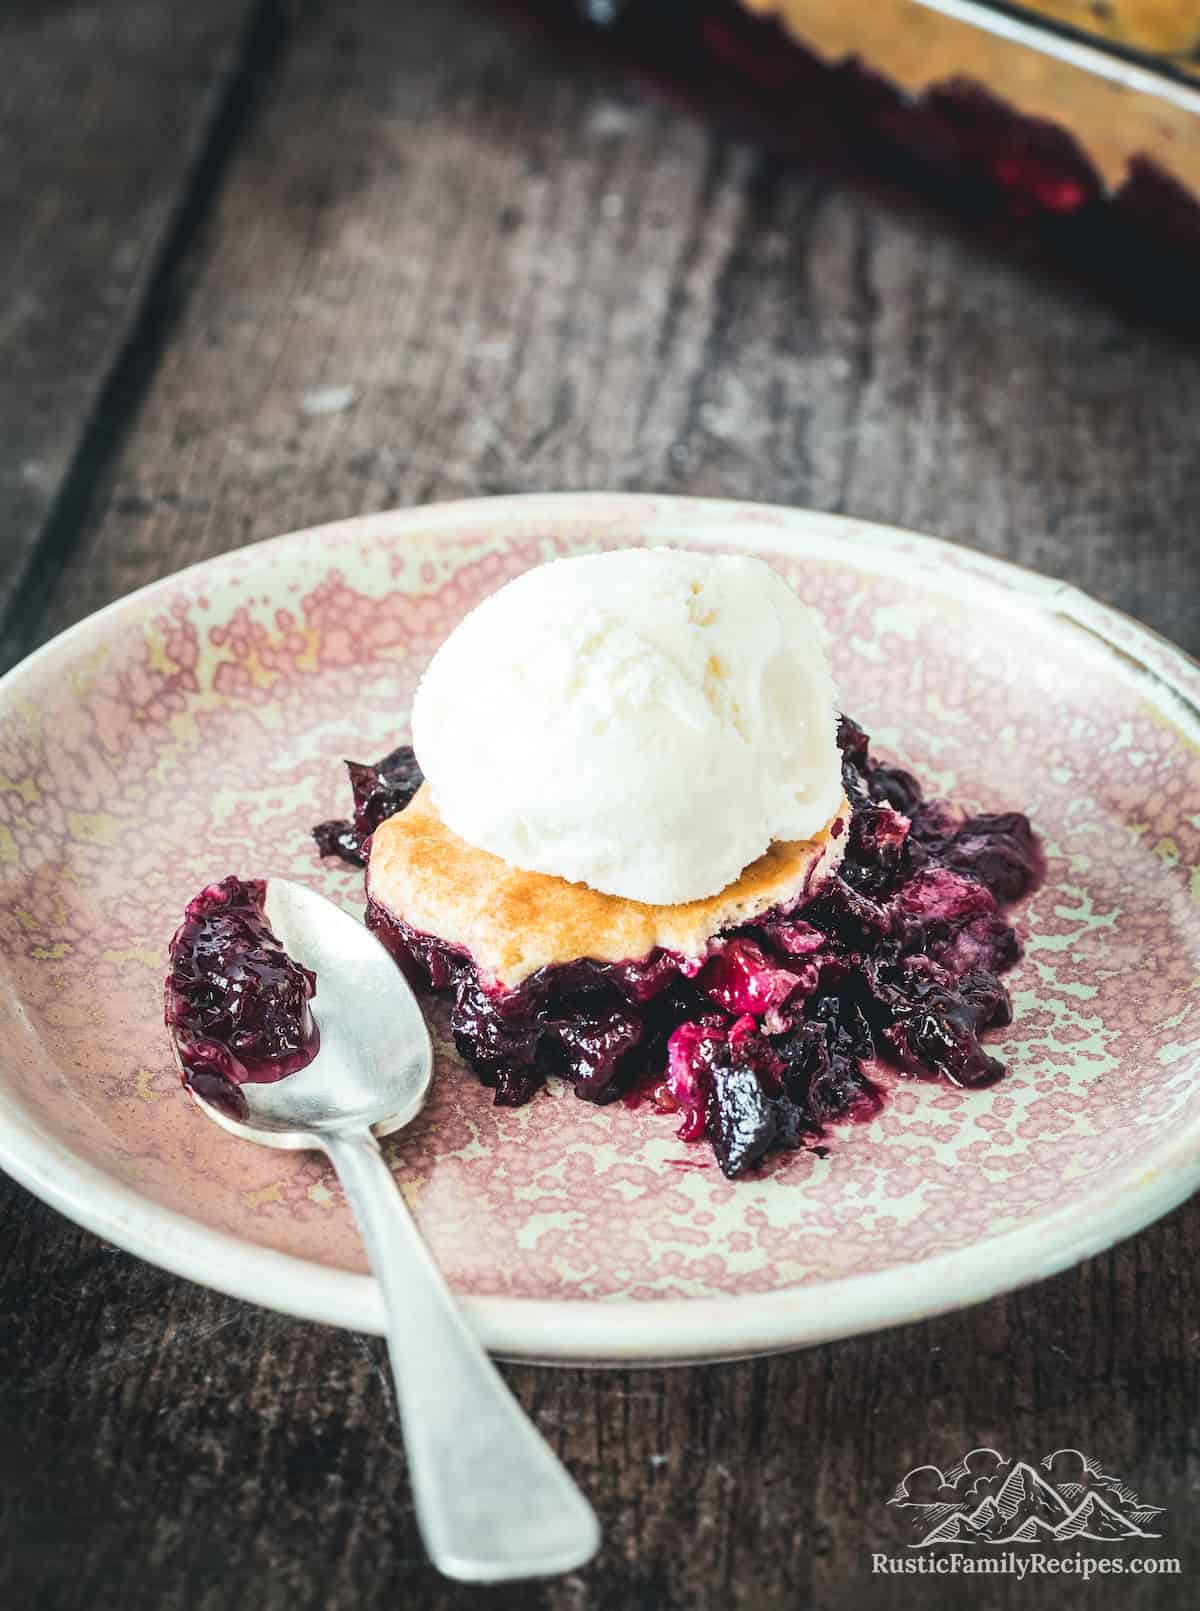 A serving of blueberry peach cobbler topped with ice cream